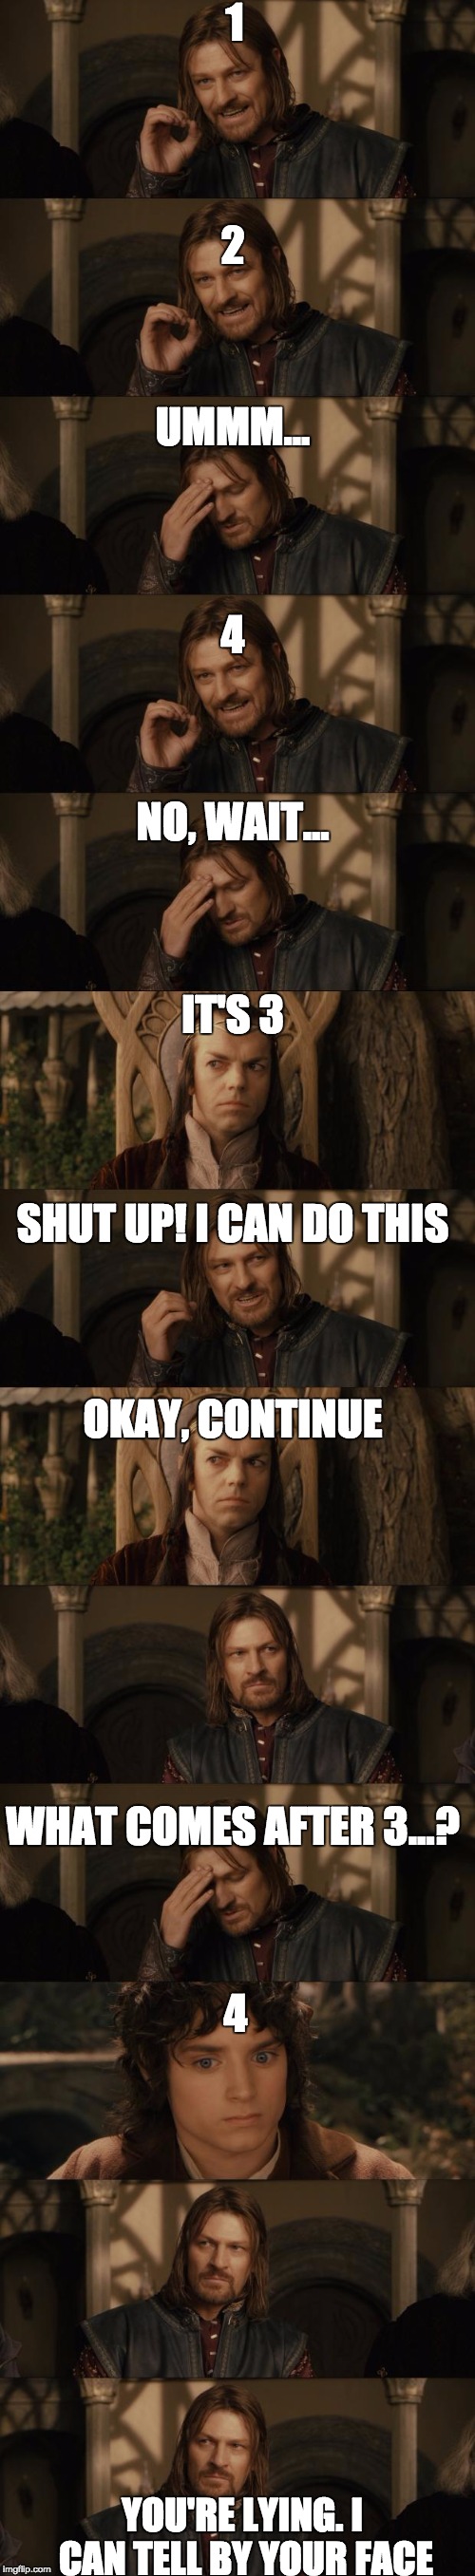 Counting with Boromir | 1; 2; UMMM... 4; NO, WAIT... IT'S 3; SHUT UP! I CAN DO THIS; OKAY, CONTINUE; WHAT COMES AFTER 3...? 4; YOU'RE LYING. I CAN TELL BY YOUR FACE | image tagged in one does not simply,lord of the rings,funny | made w/ Imgflip meme maker